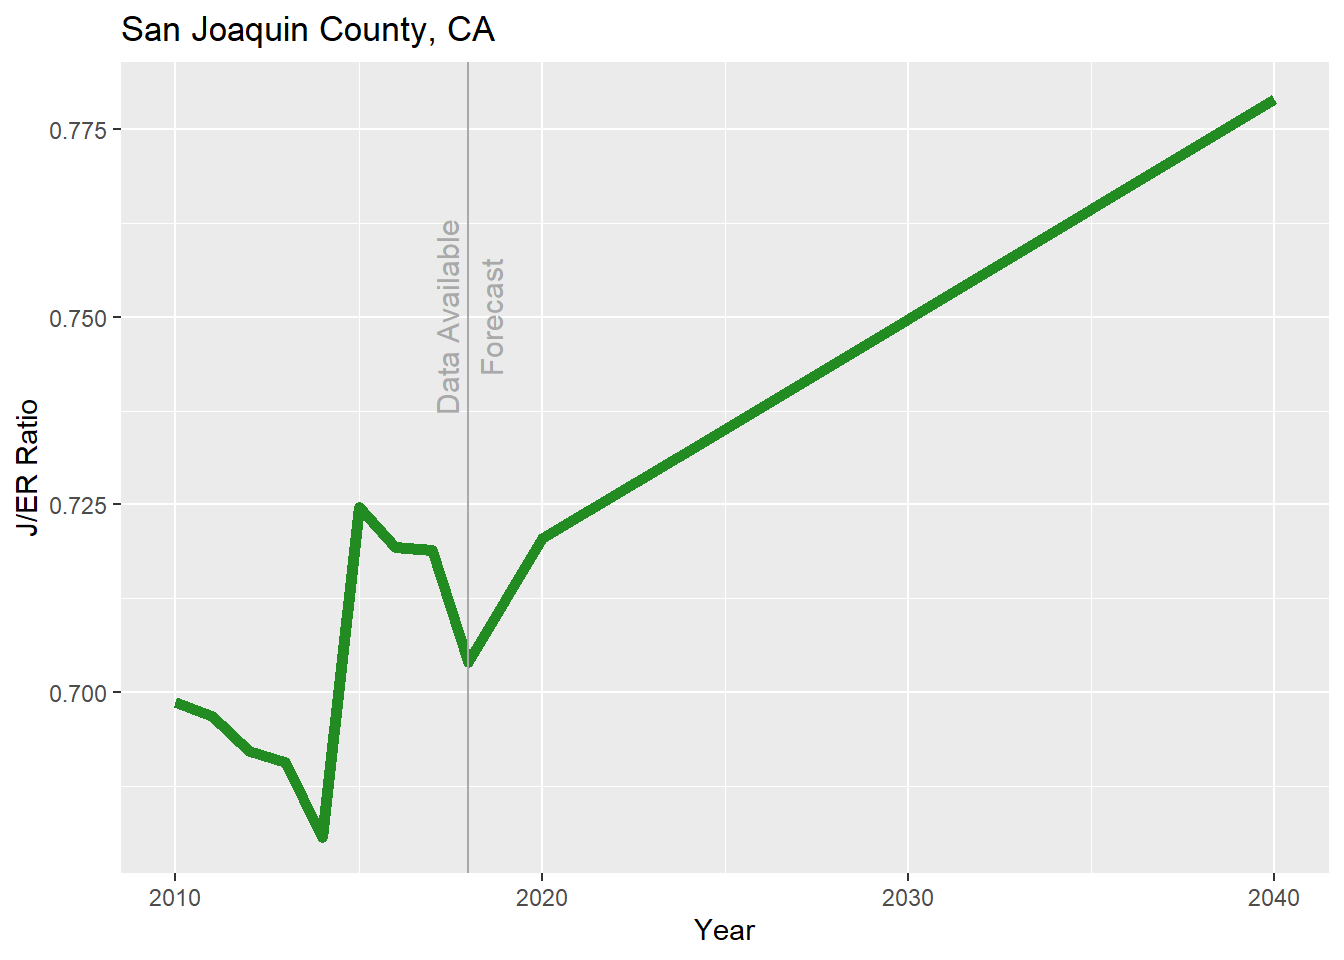 Historical Jobs to Employed Residents Ratio for San Joaquin County 2010-2018, followed by projections to 2040.